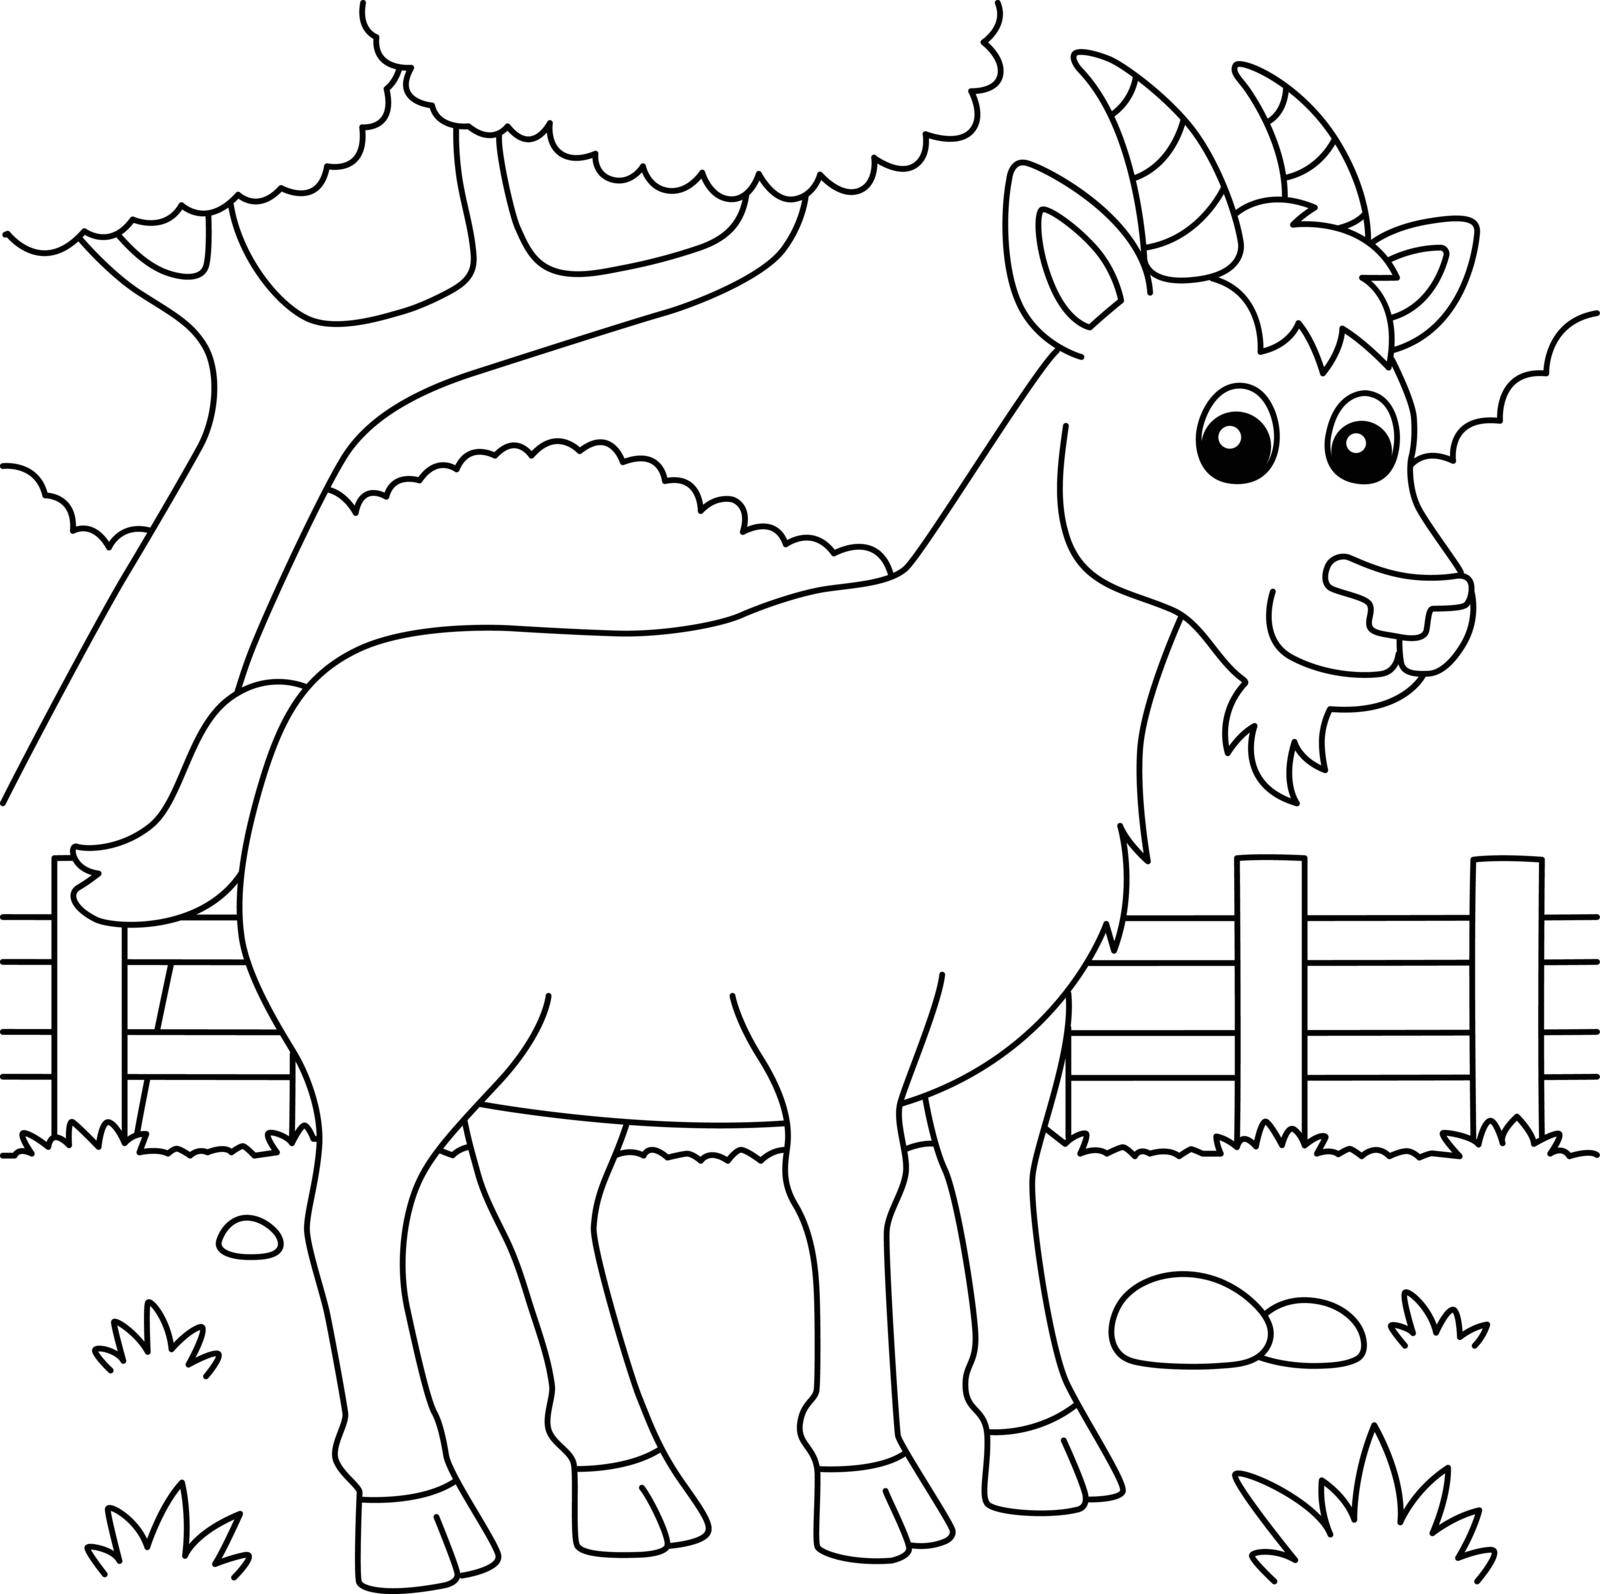 A cute and funny coloring page of a goat. Provides hours of coloring fun for children. To color, this page is very easy. Suitable for little kids and toddlers.